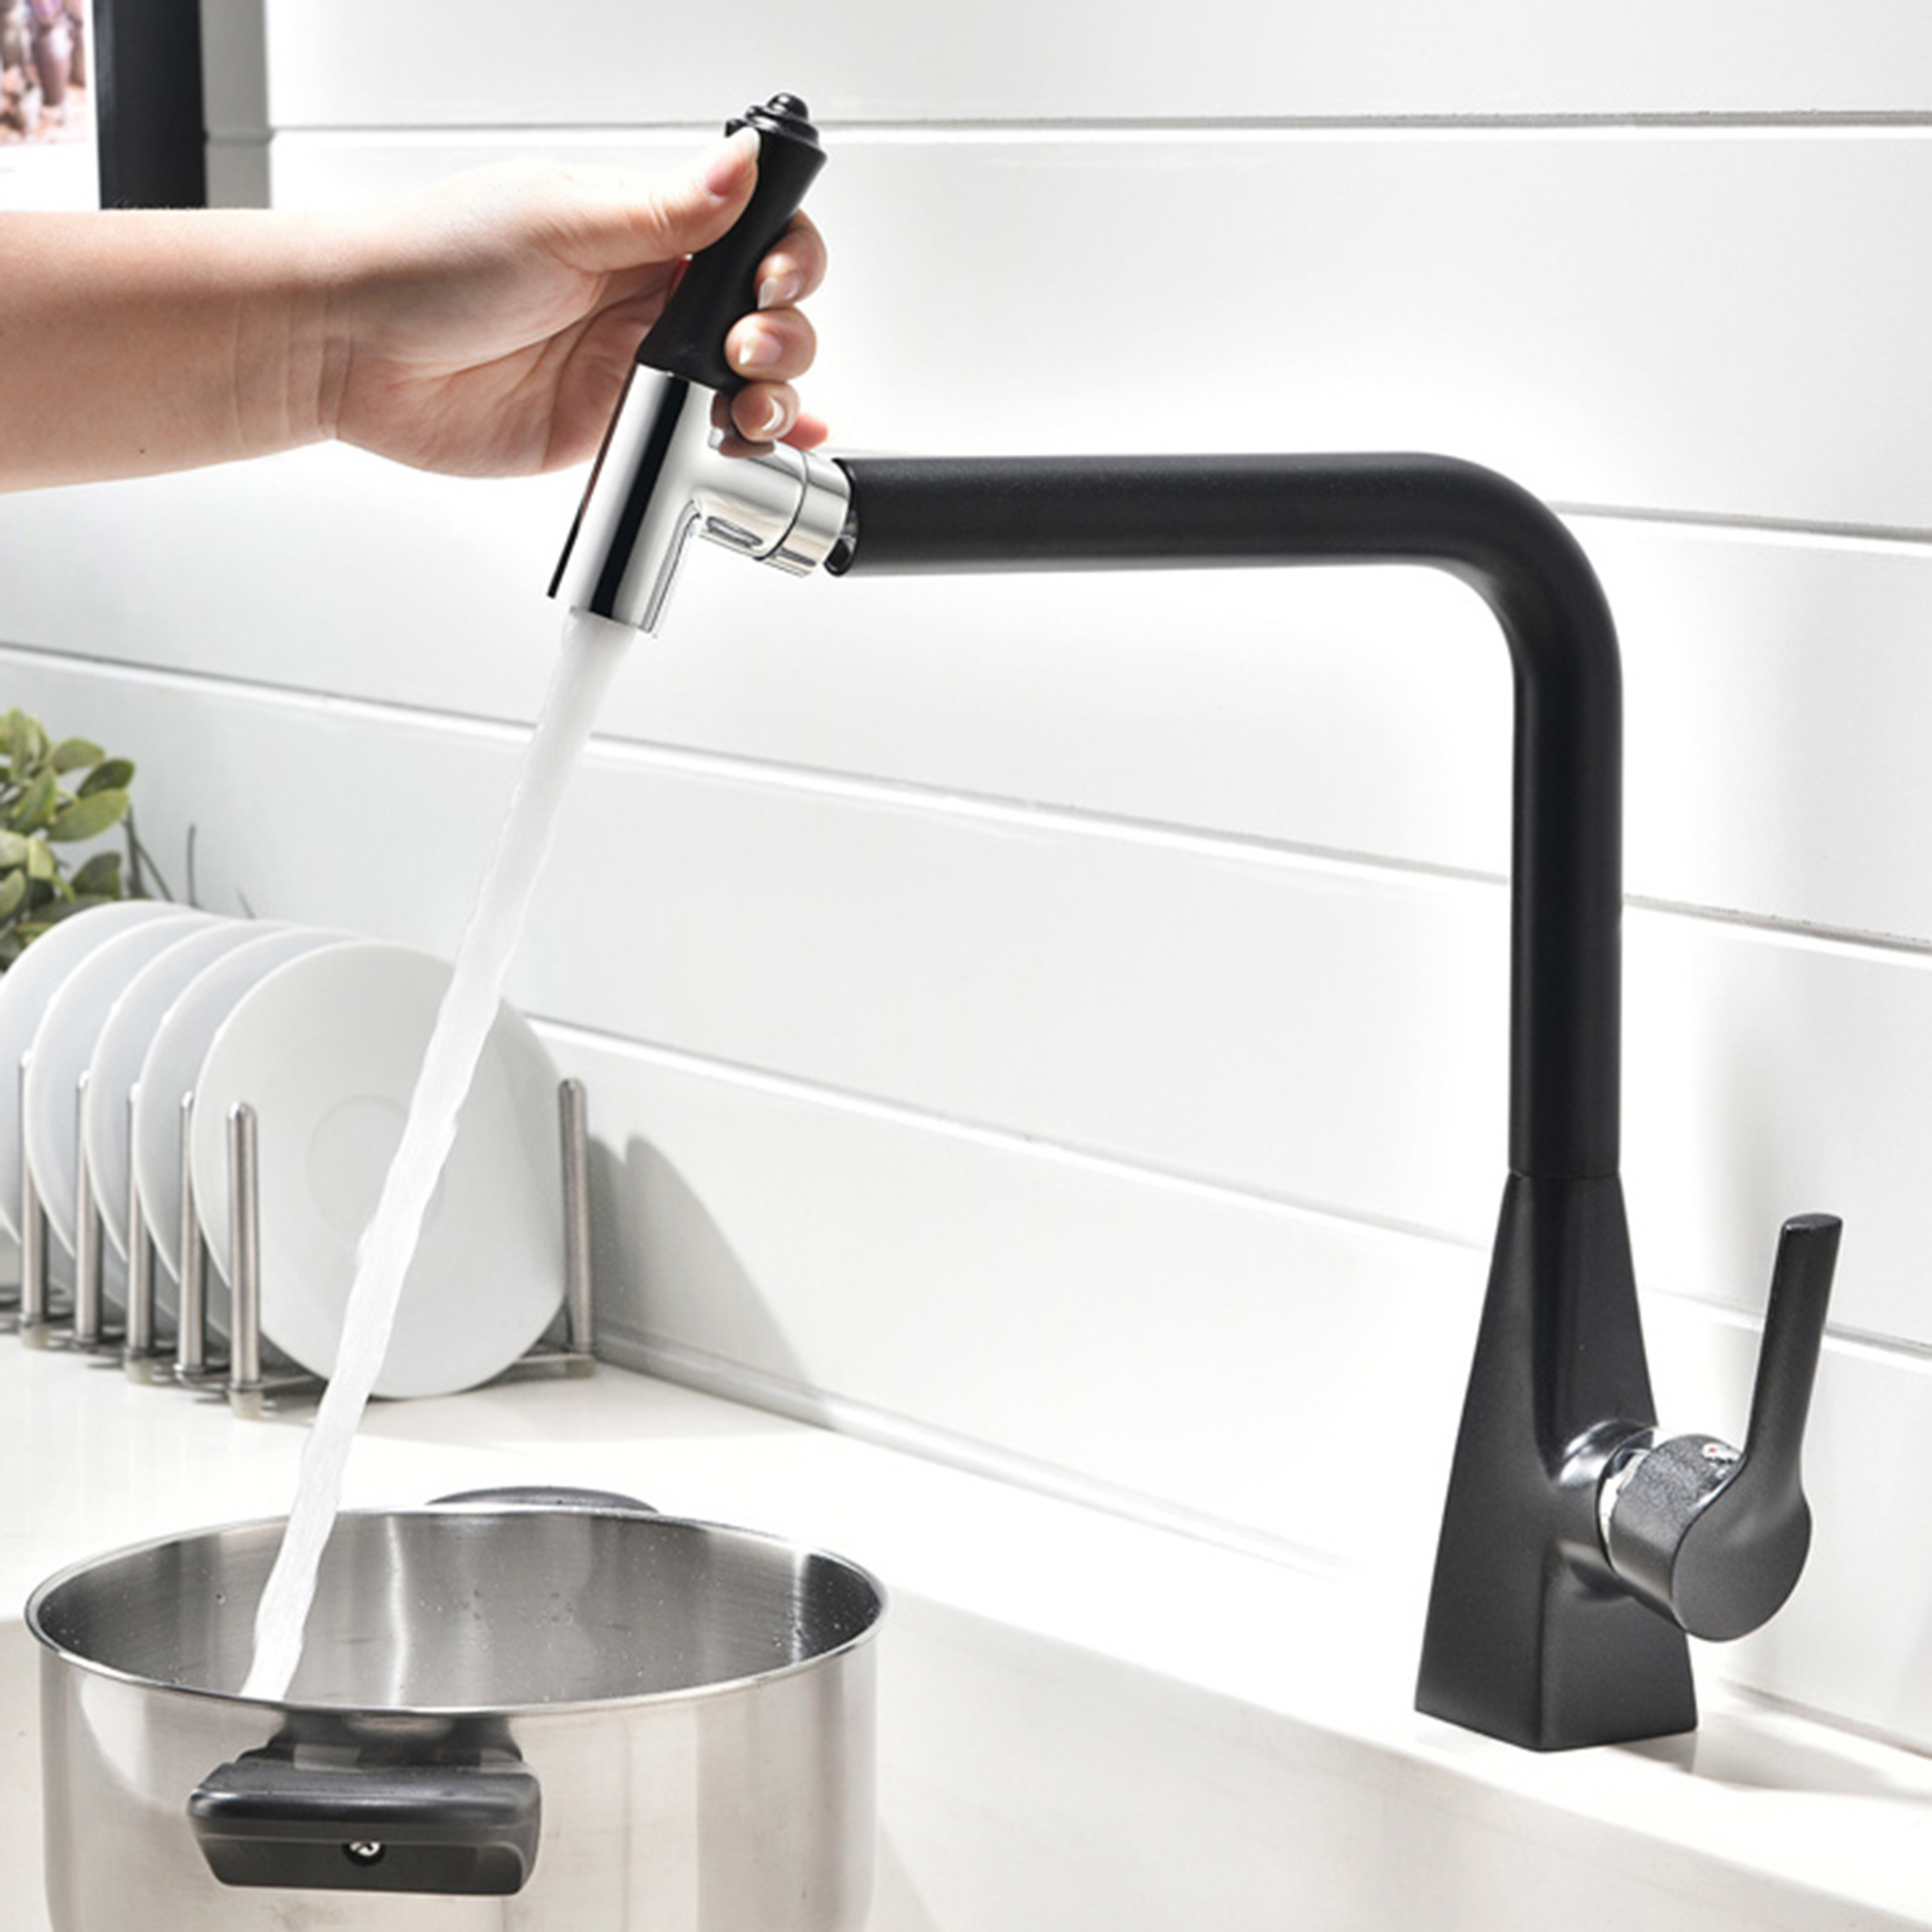 kitchen sinks faucets